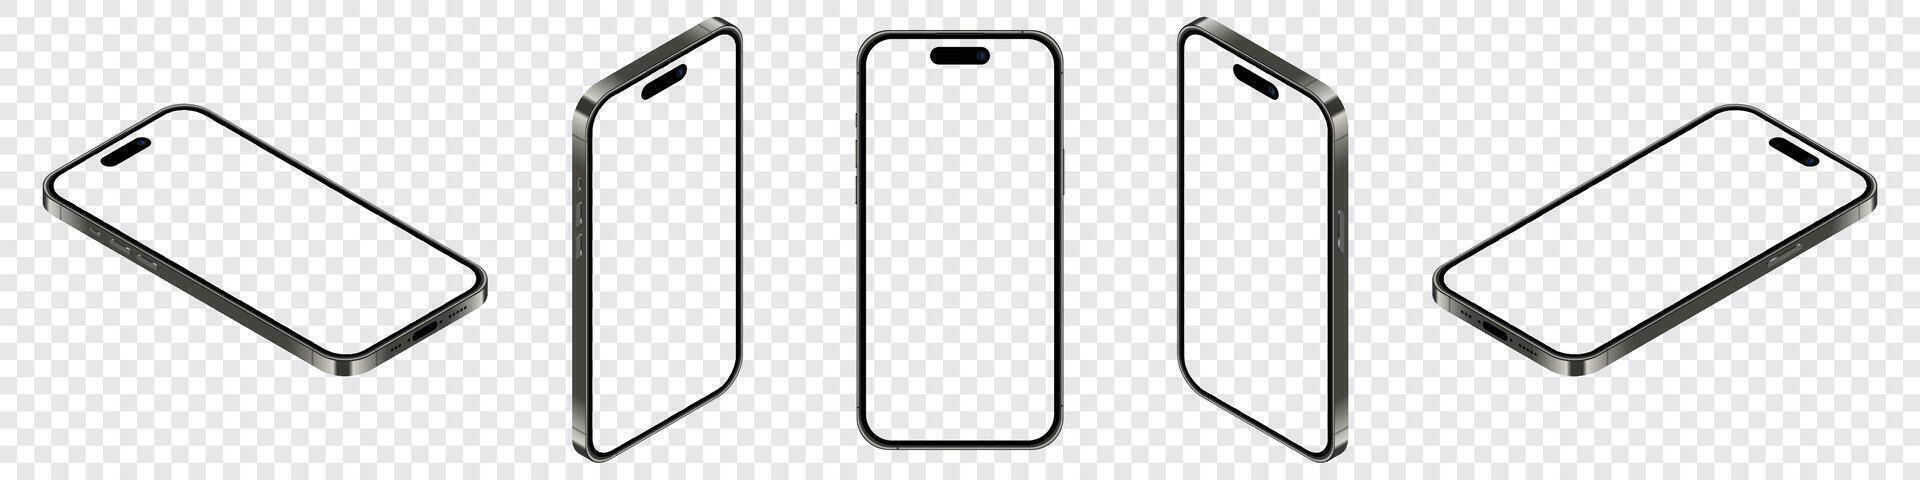 Realistic iphone mockup. Perspective iphone mockup. Mockup of iphone 15 pro max. Smartphone mockup with blank screen vector